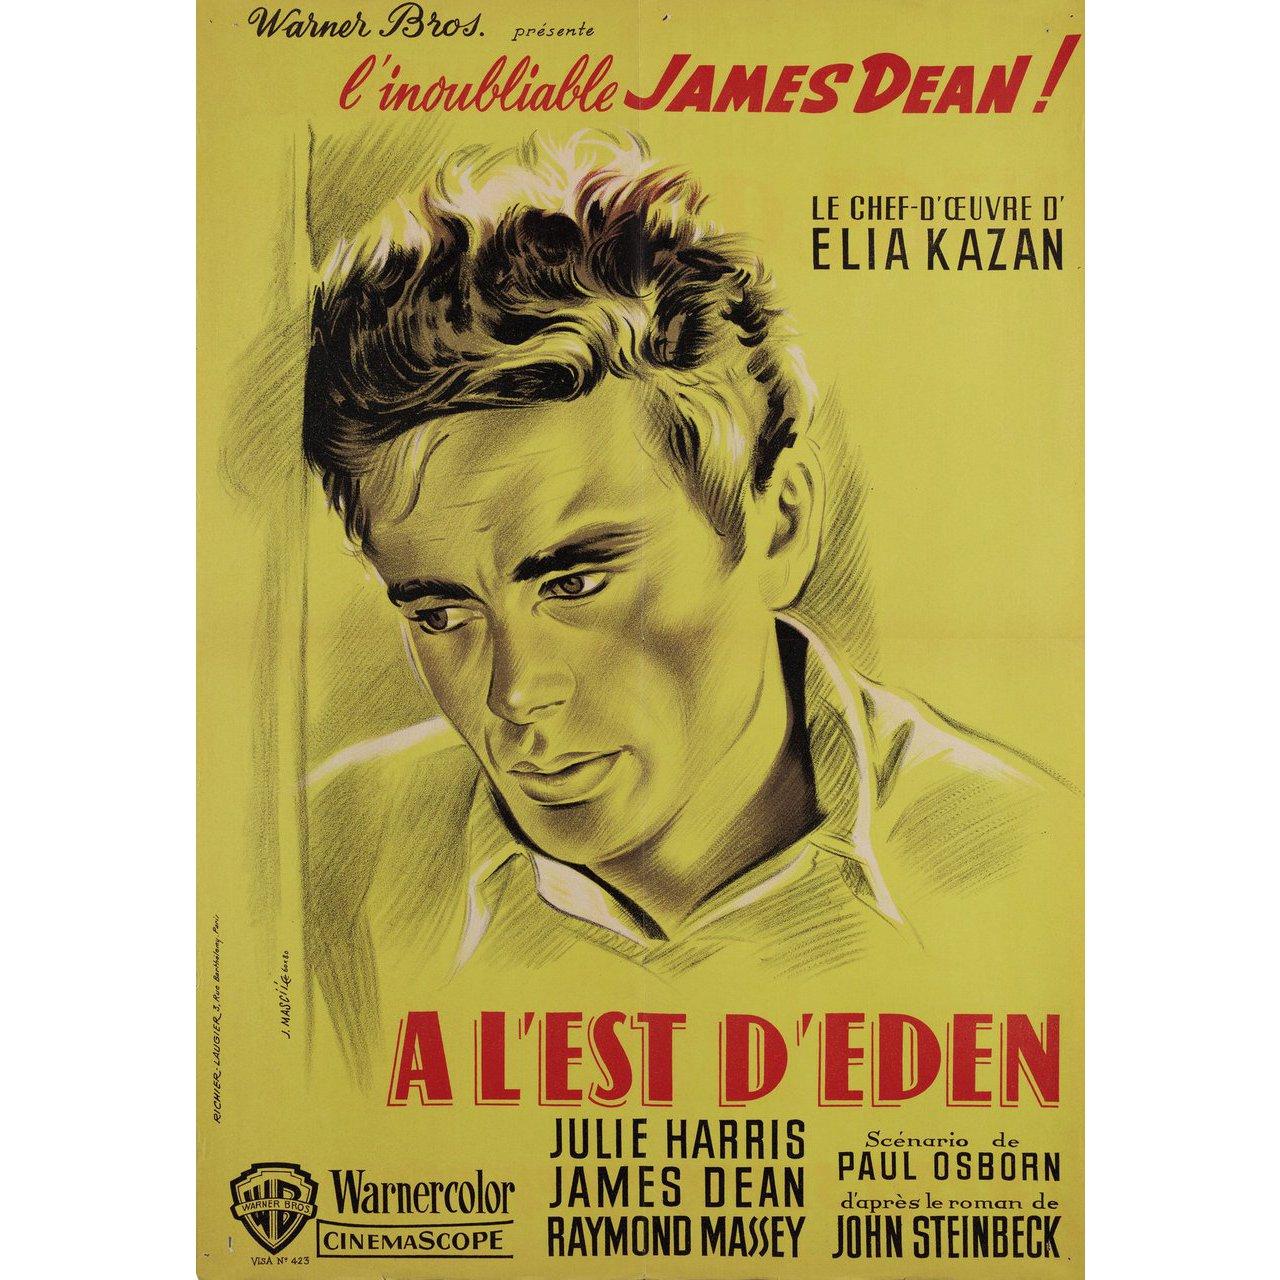 Original 1960s re-release French moyenne poster by Jean Mascii for the 1955 film East of Eden directed by Elia Kazan with Julie Harris / James Dean / Raymond Massey / Burl Ives. Very Good-Fine condition, folded. Many original posters were issued